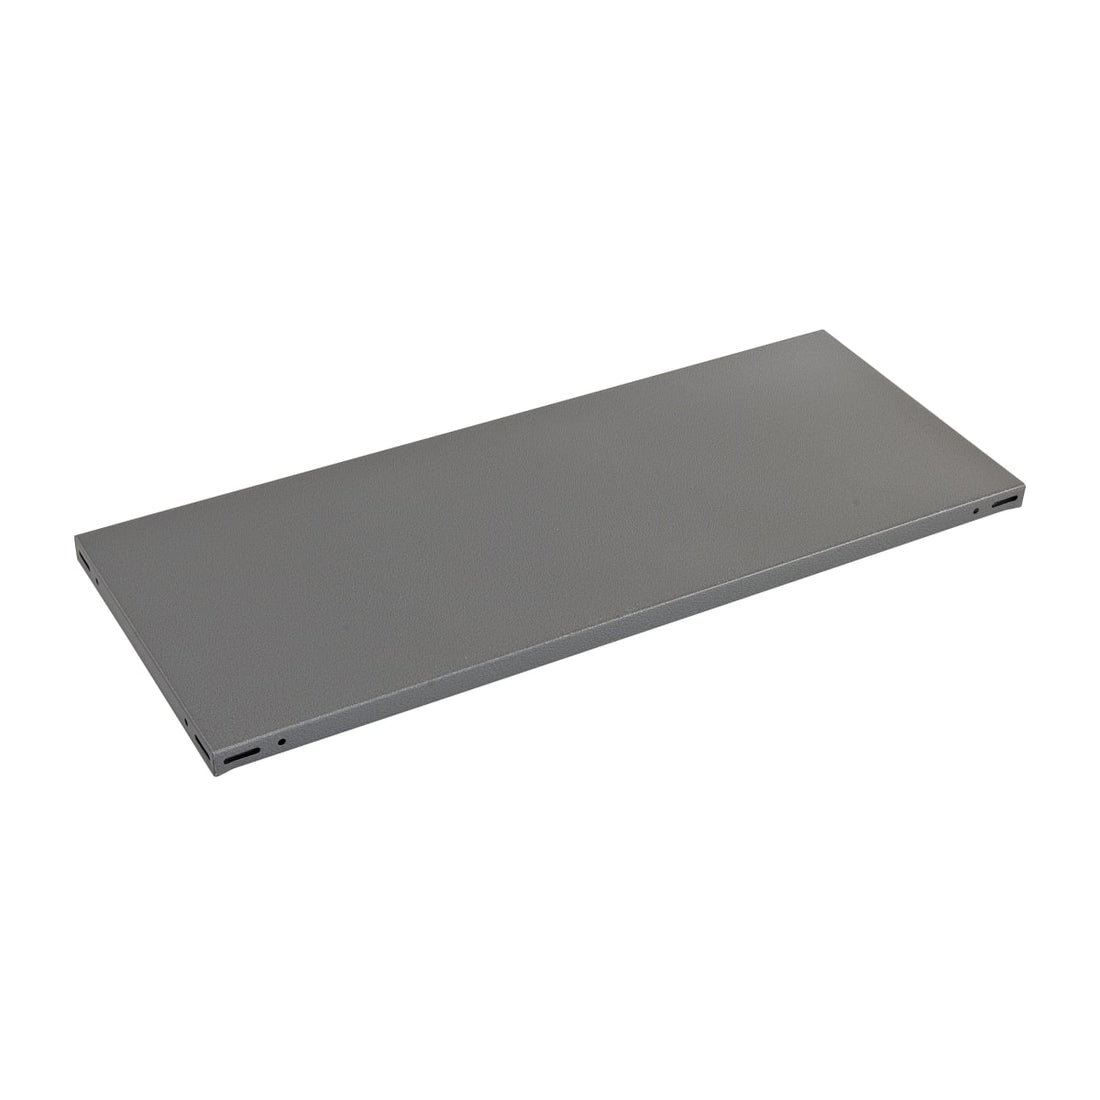 W120xD60 CM LOADING 200KG METAL BRICKETED GREY COLOUR SHEET